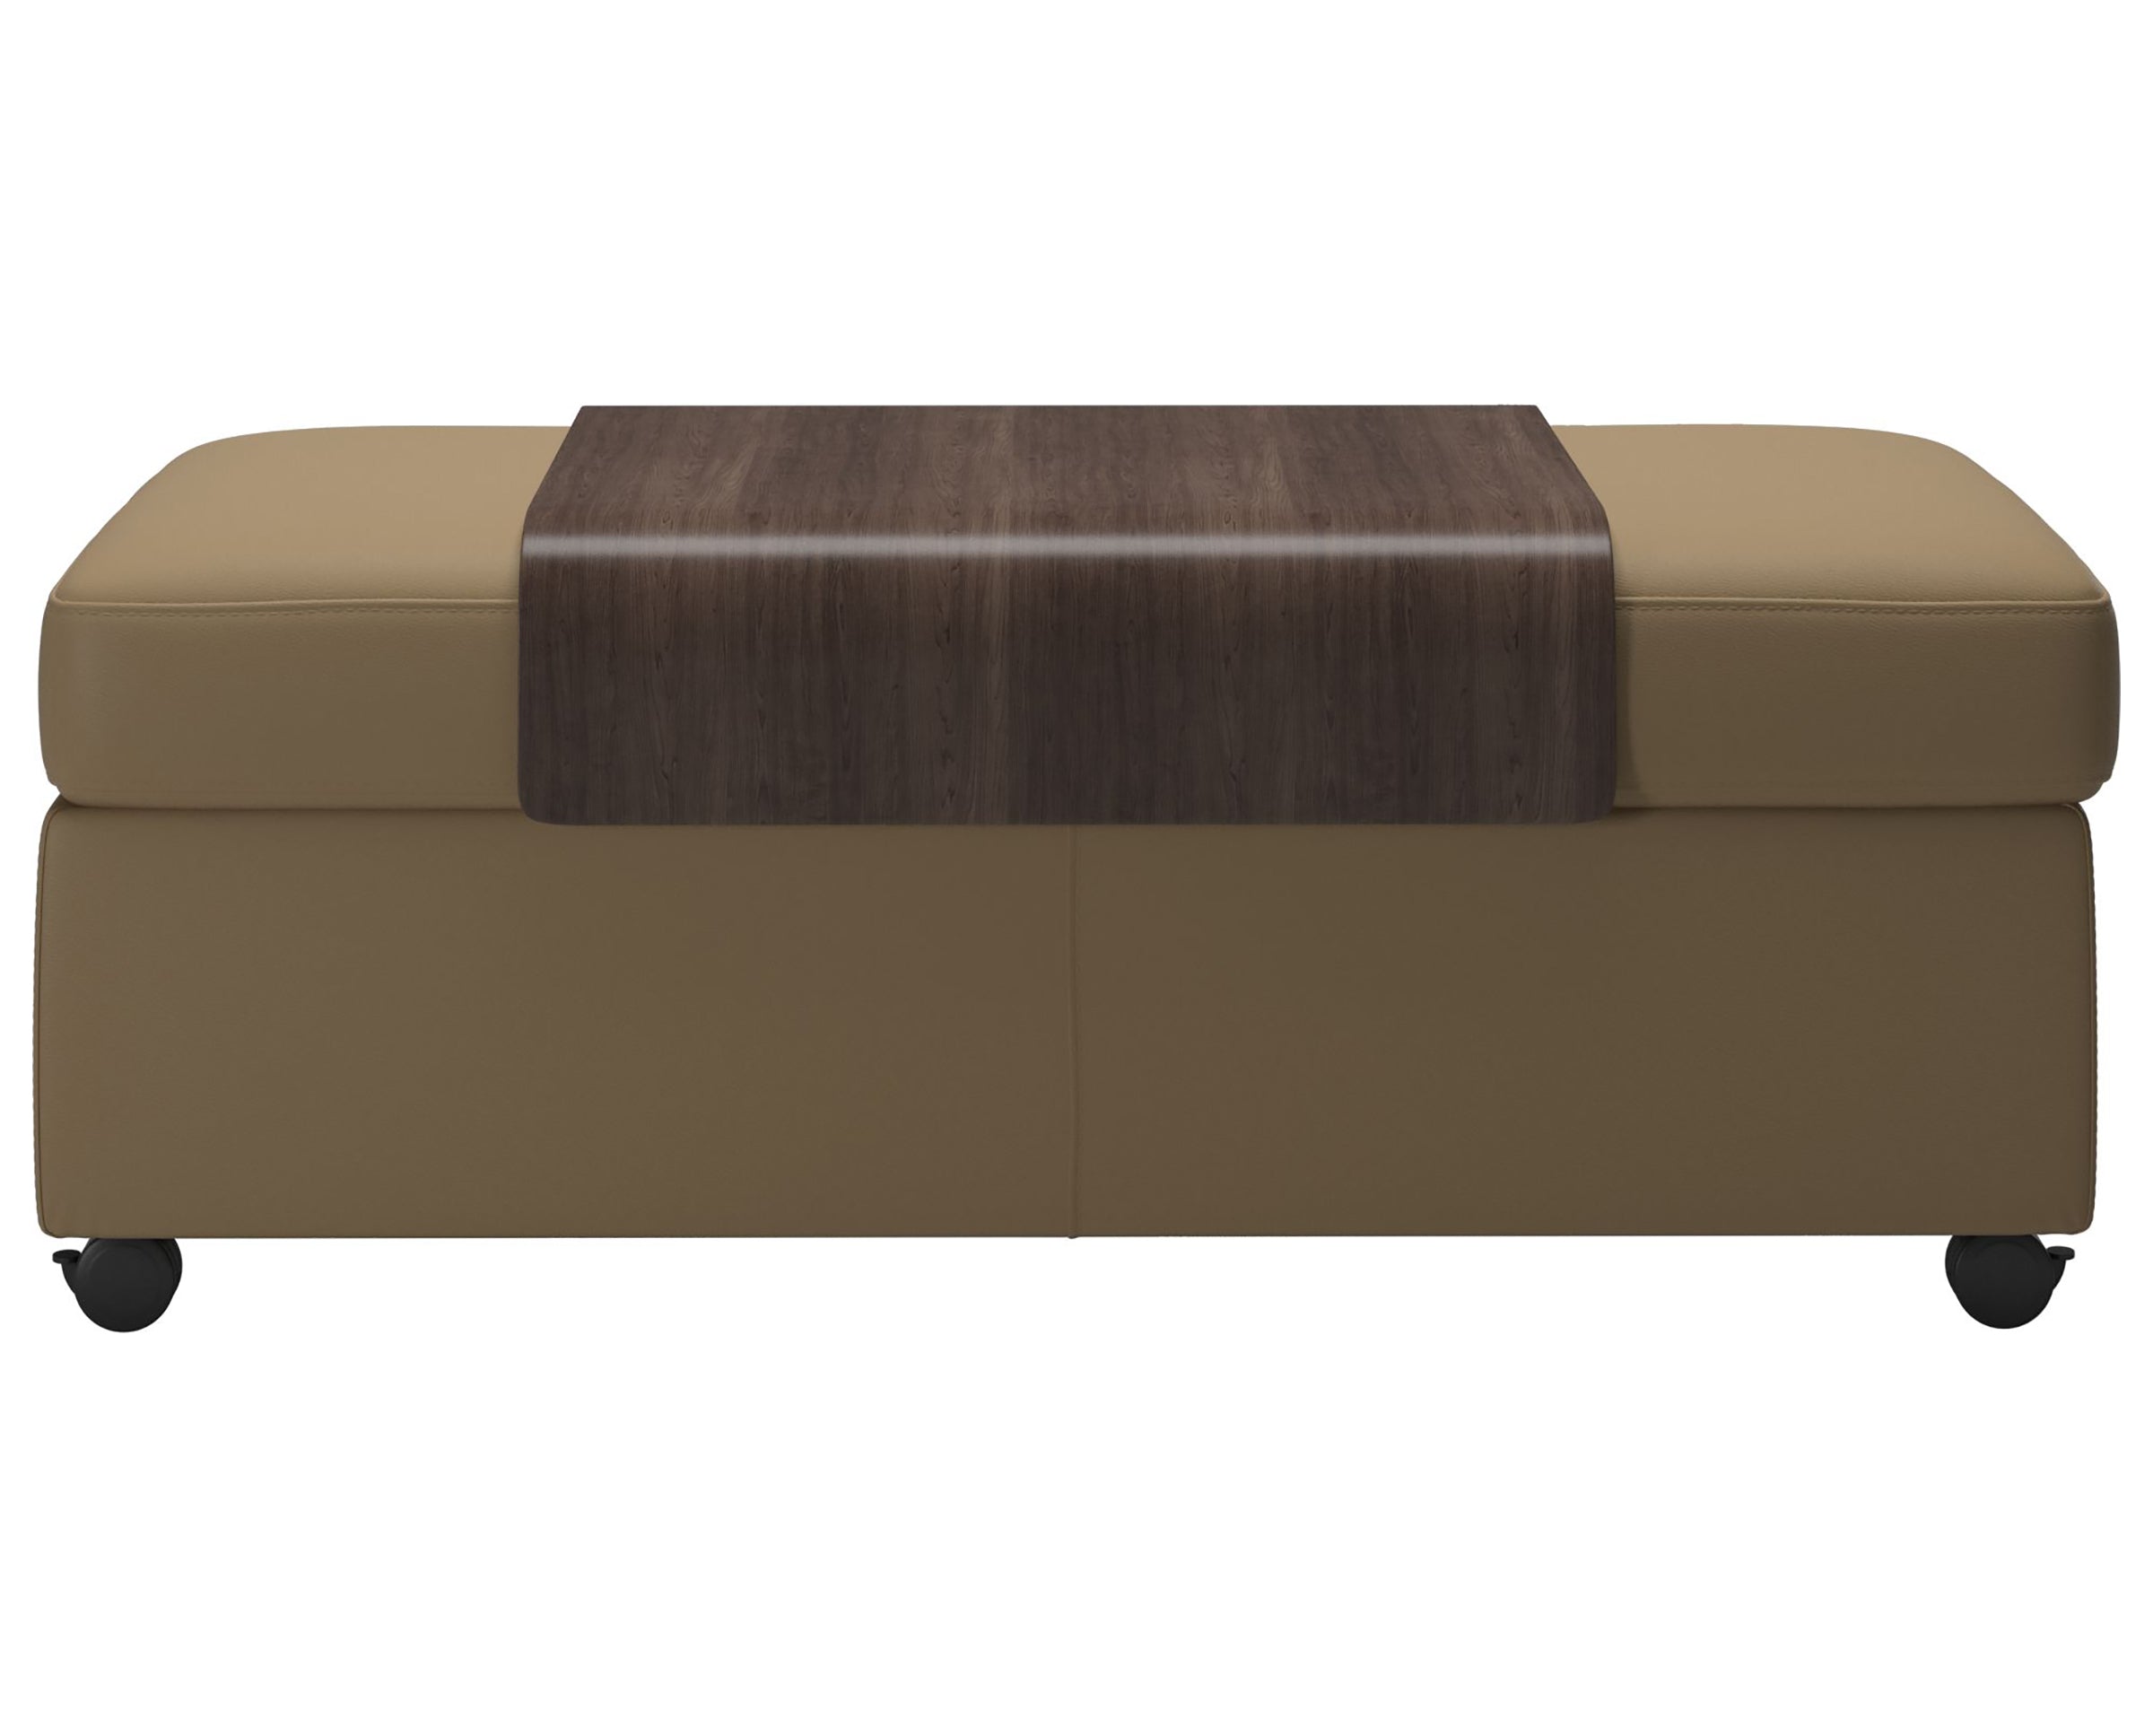 Paloma Leather Sand and Wenge Finish | Stressless Double Ottoman with Table | Valley Ridge Furniture